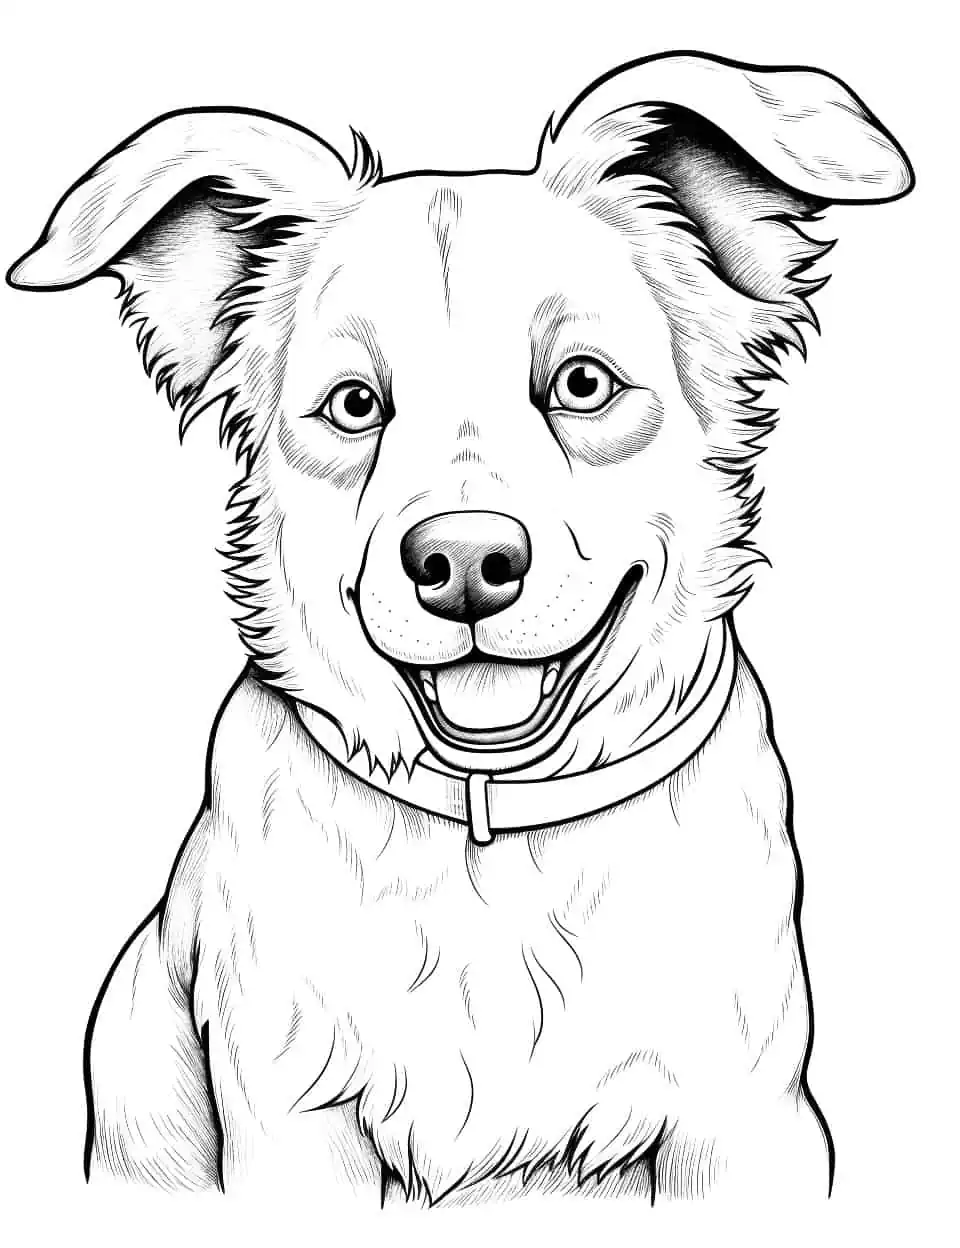 Advanced Border Collie Drawing Dog Coloring Page - An advanced coloring page featuring a realistic and detailed Border Collie.